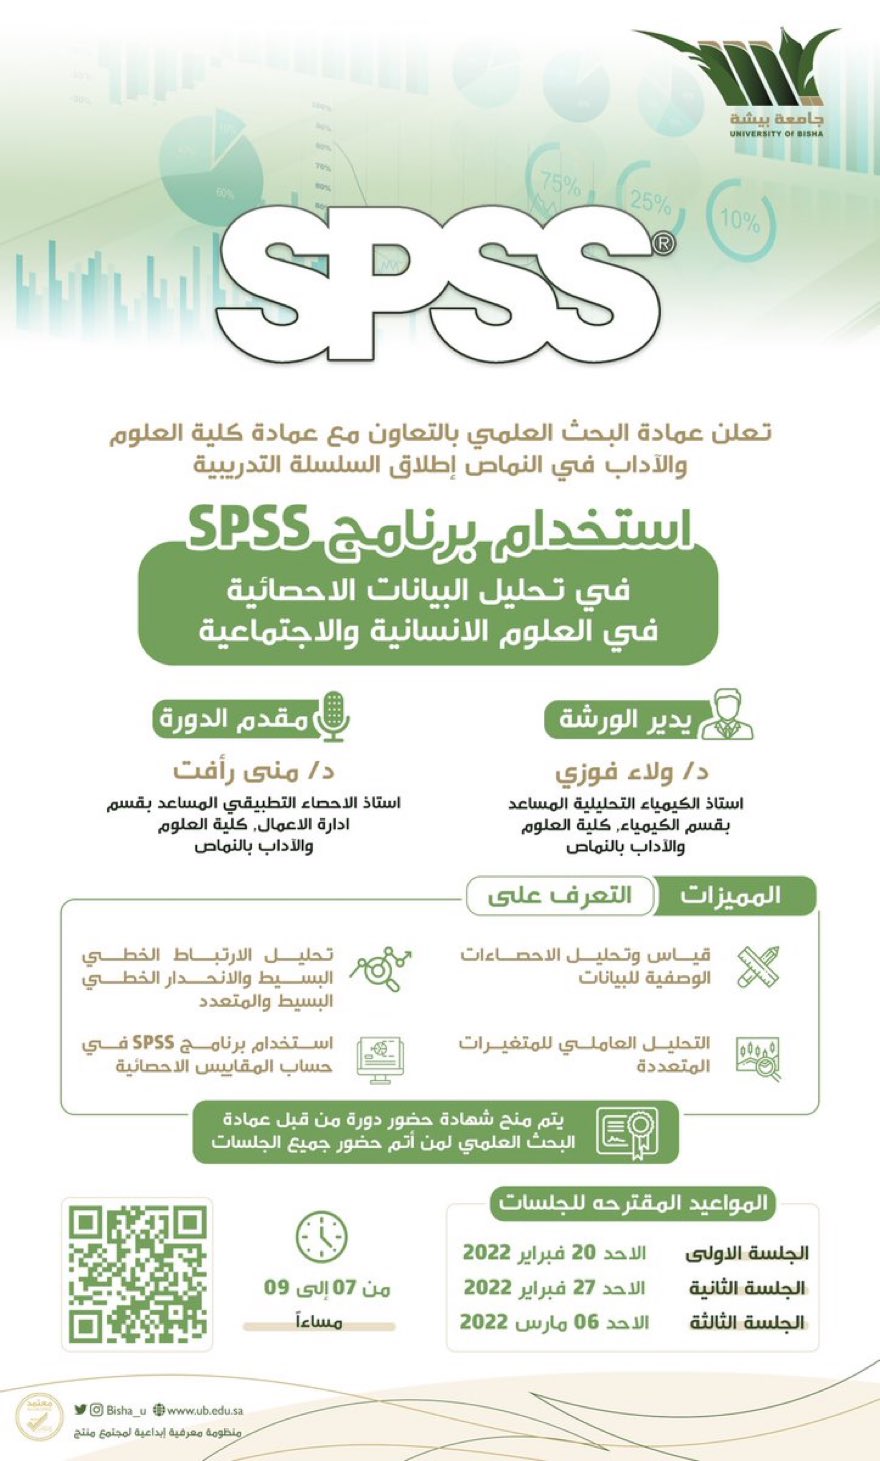 The Deanship of Scientific Research in cooperation With College of Sciences and Arts, Al-Namas organizes a series of training courses entitled “Using the SPSS Program